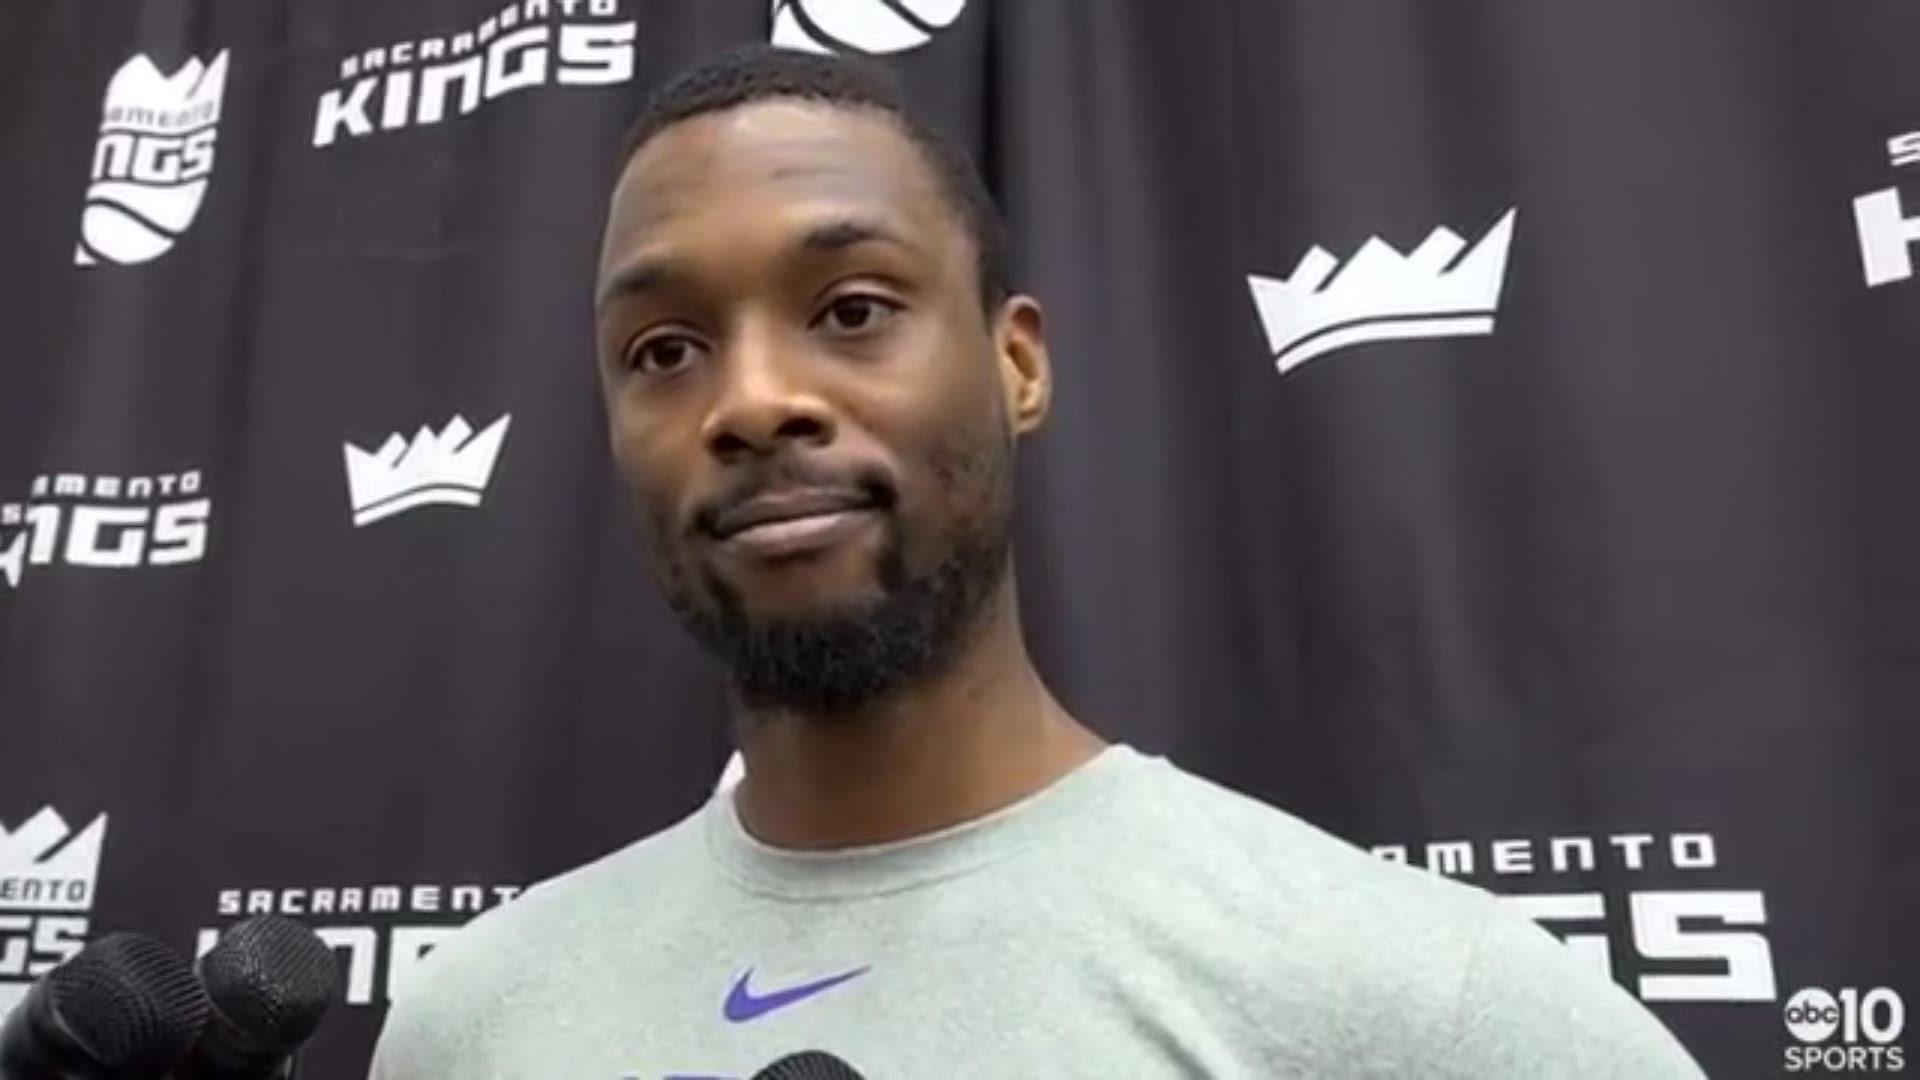 New Kings forward Harrison Barnes talks about how he spent the All-Star break, still getting familiar with Sacramento, looking forward to facing his former Warriors team on Thursday and expectations for the remaining 25 games of the season.